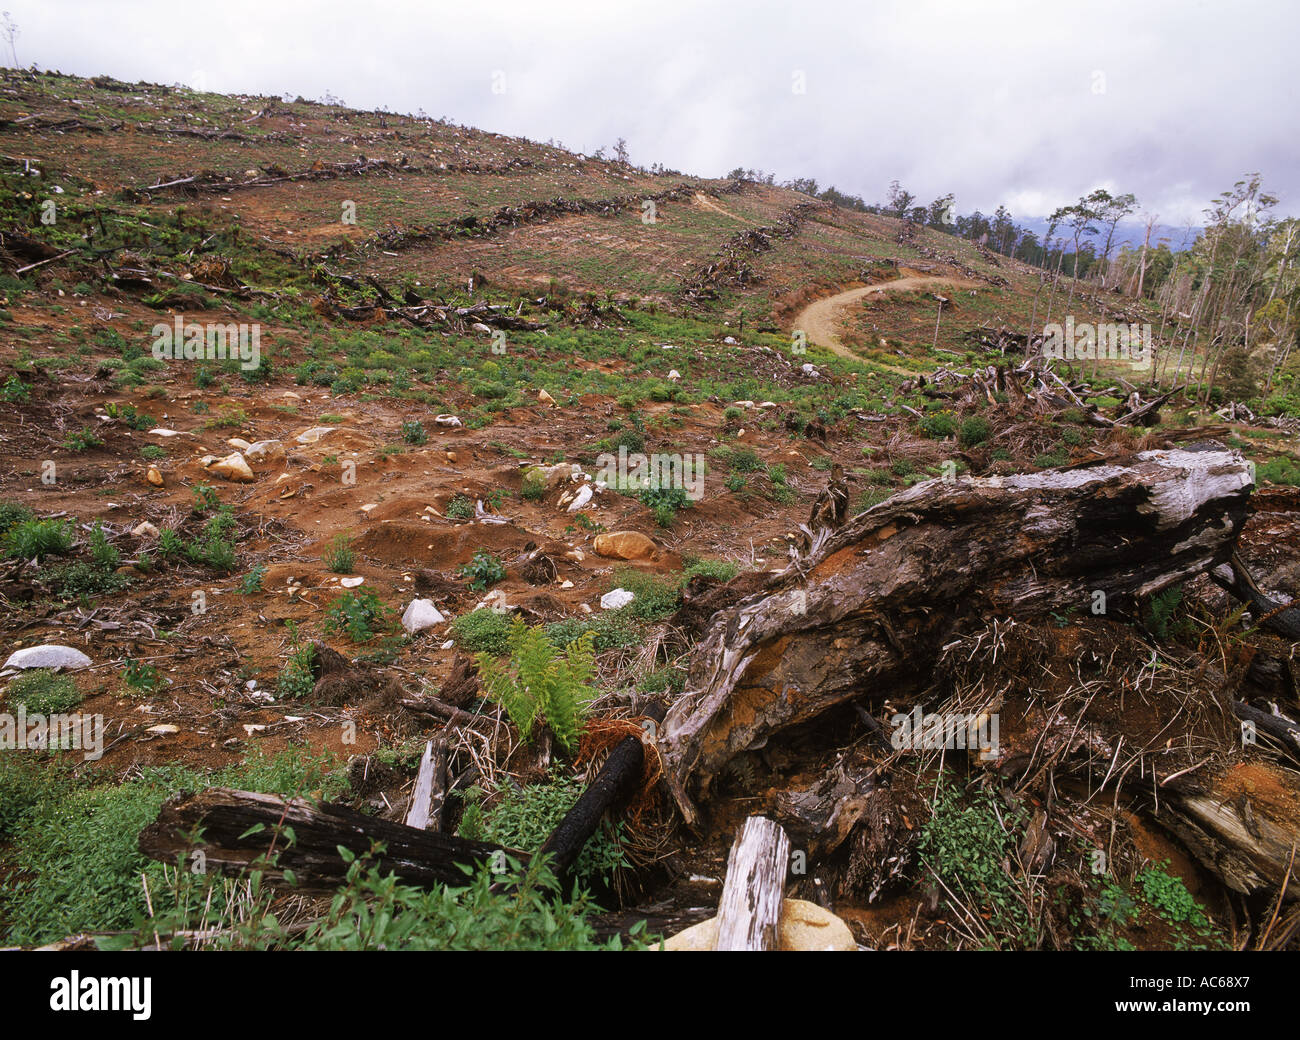 Barren hillsides left after clear cutting pine forests in Scandinavia Stock Photo